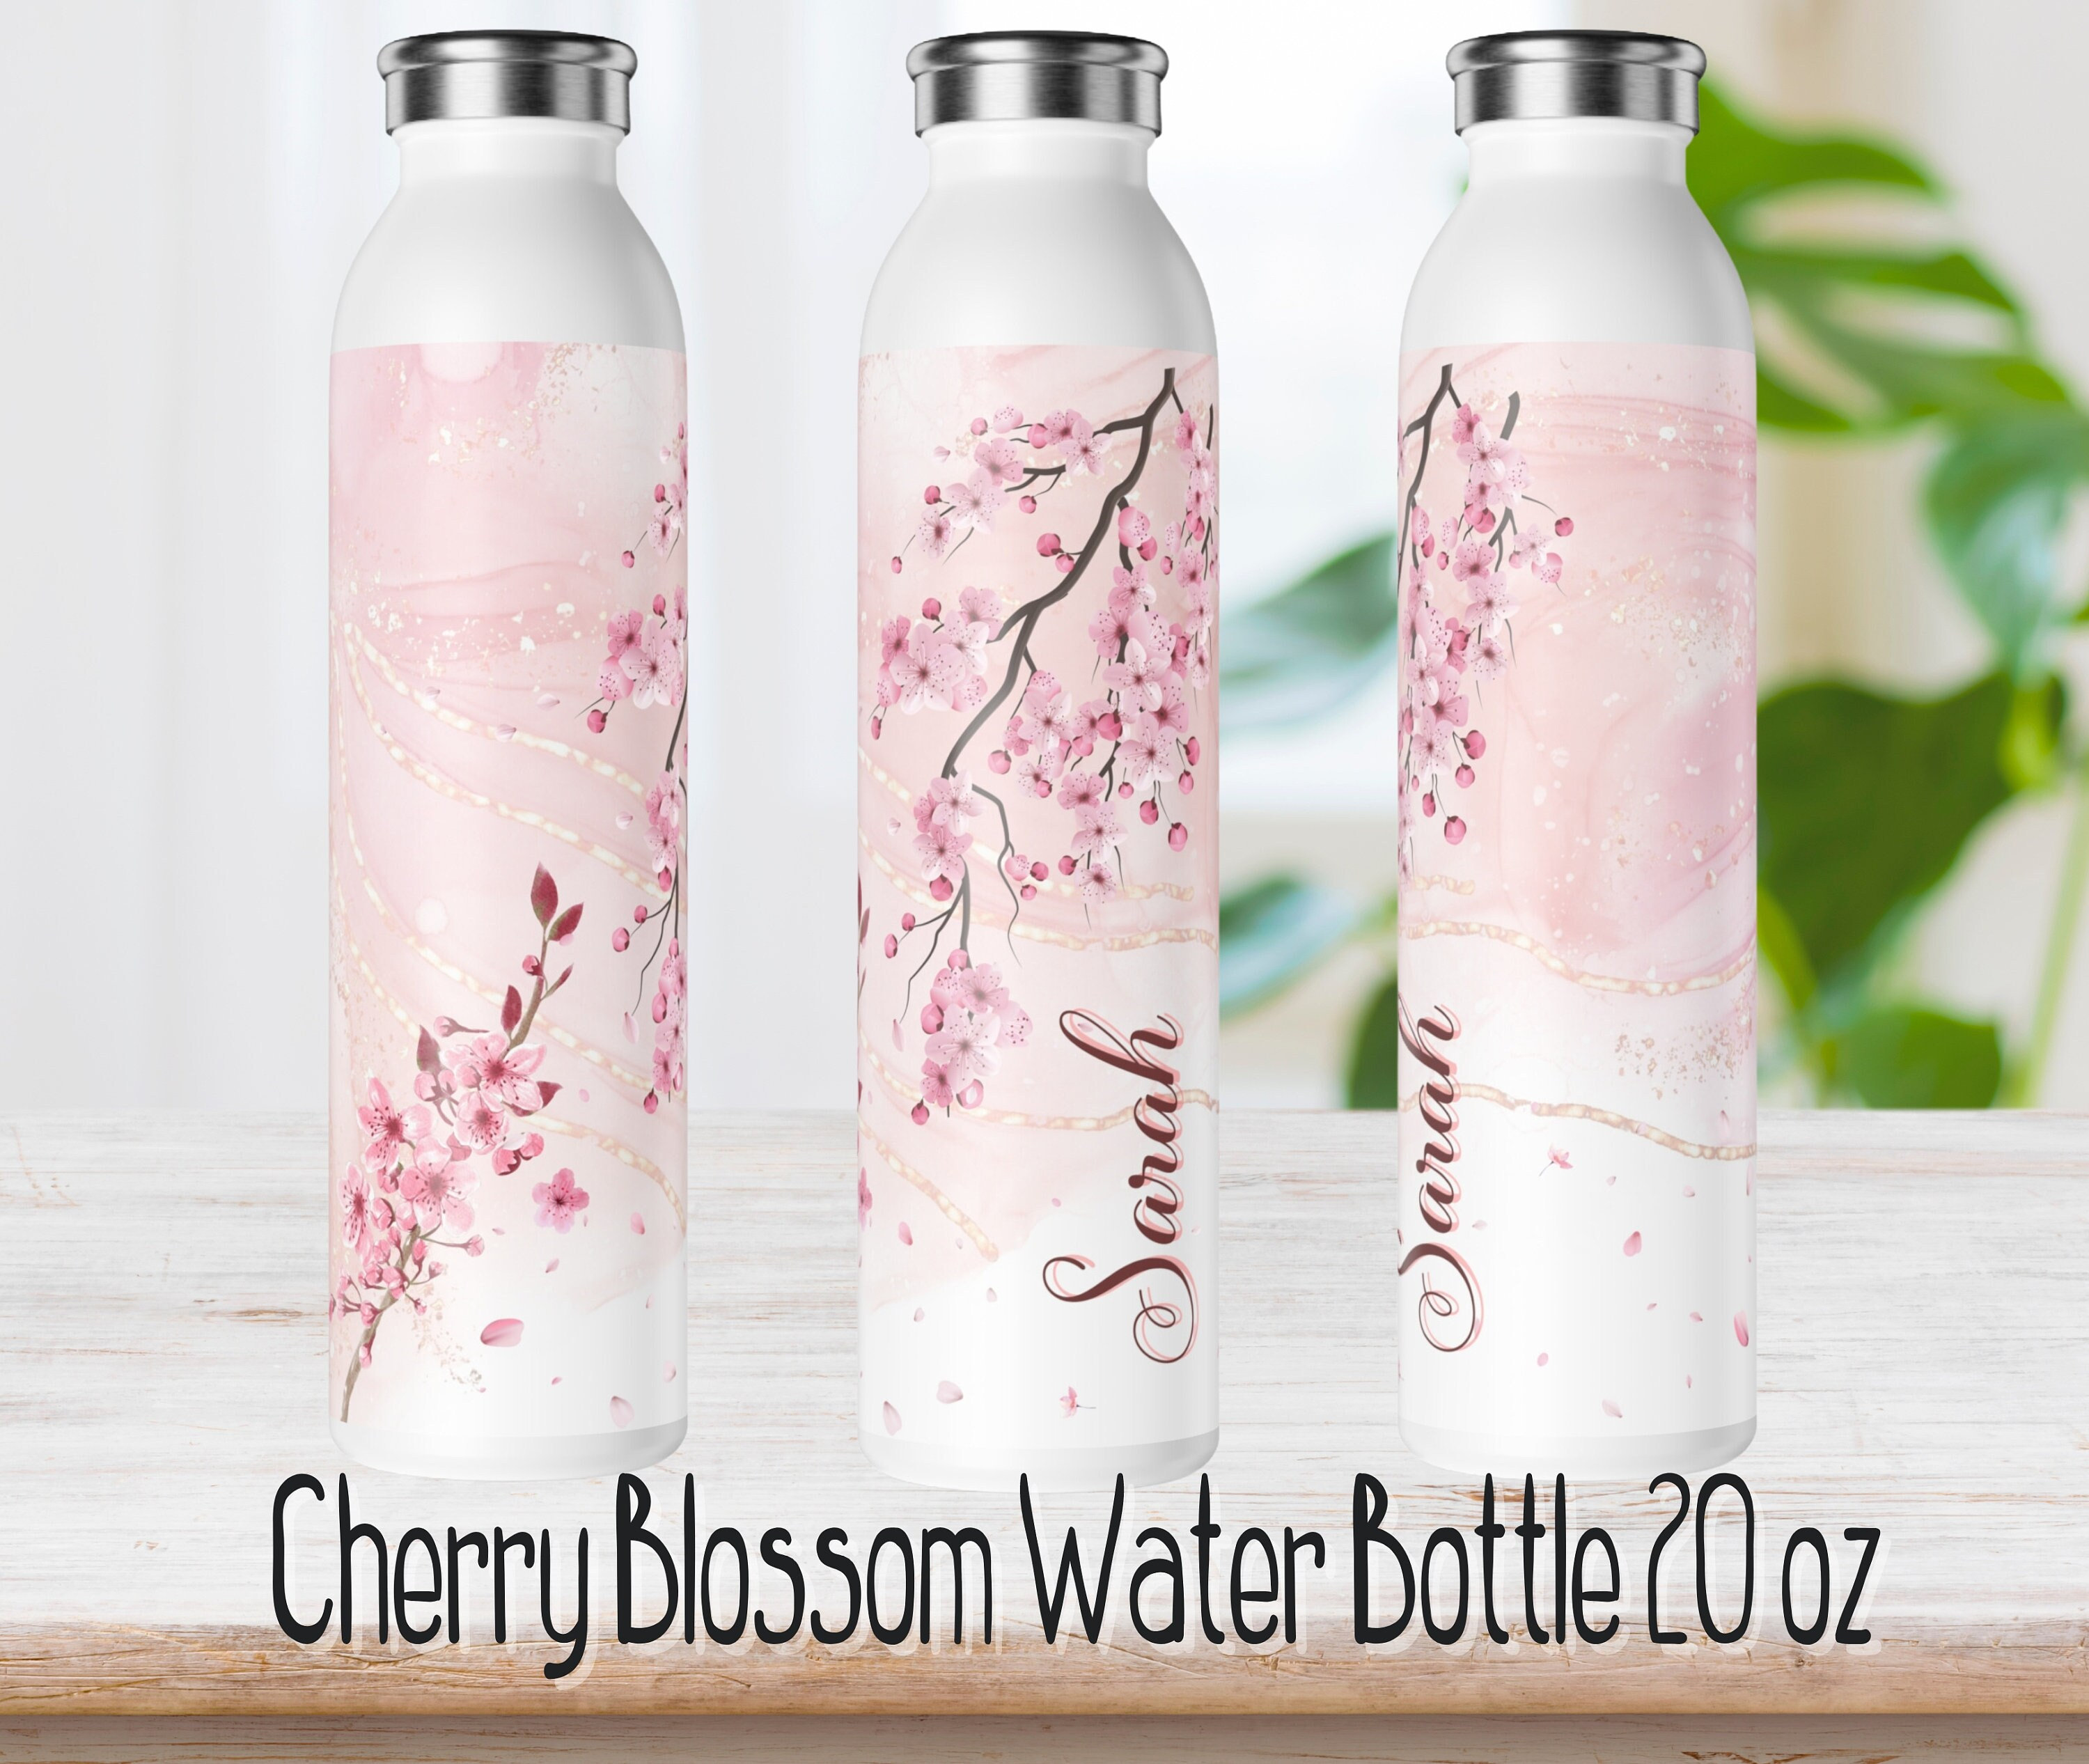  Novelty Pink Sakura High Boron Glass Cup with Ceramic Lid  Stainless Steel Spoon Drinking Cup 500ml/17oz Clear Measuring Scale Coffee  Mug with Handle Cute Cherry Blossom Water Cups for Milk Juice